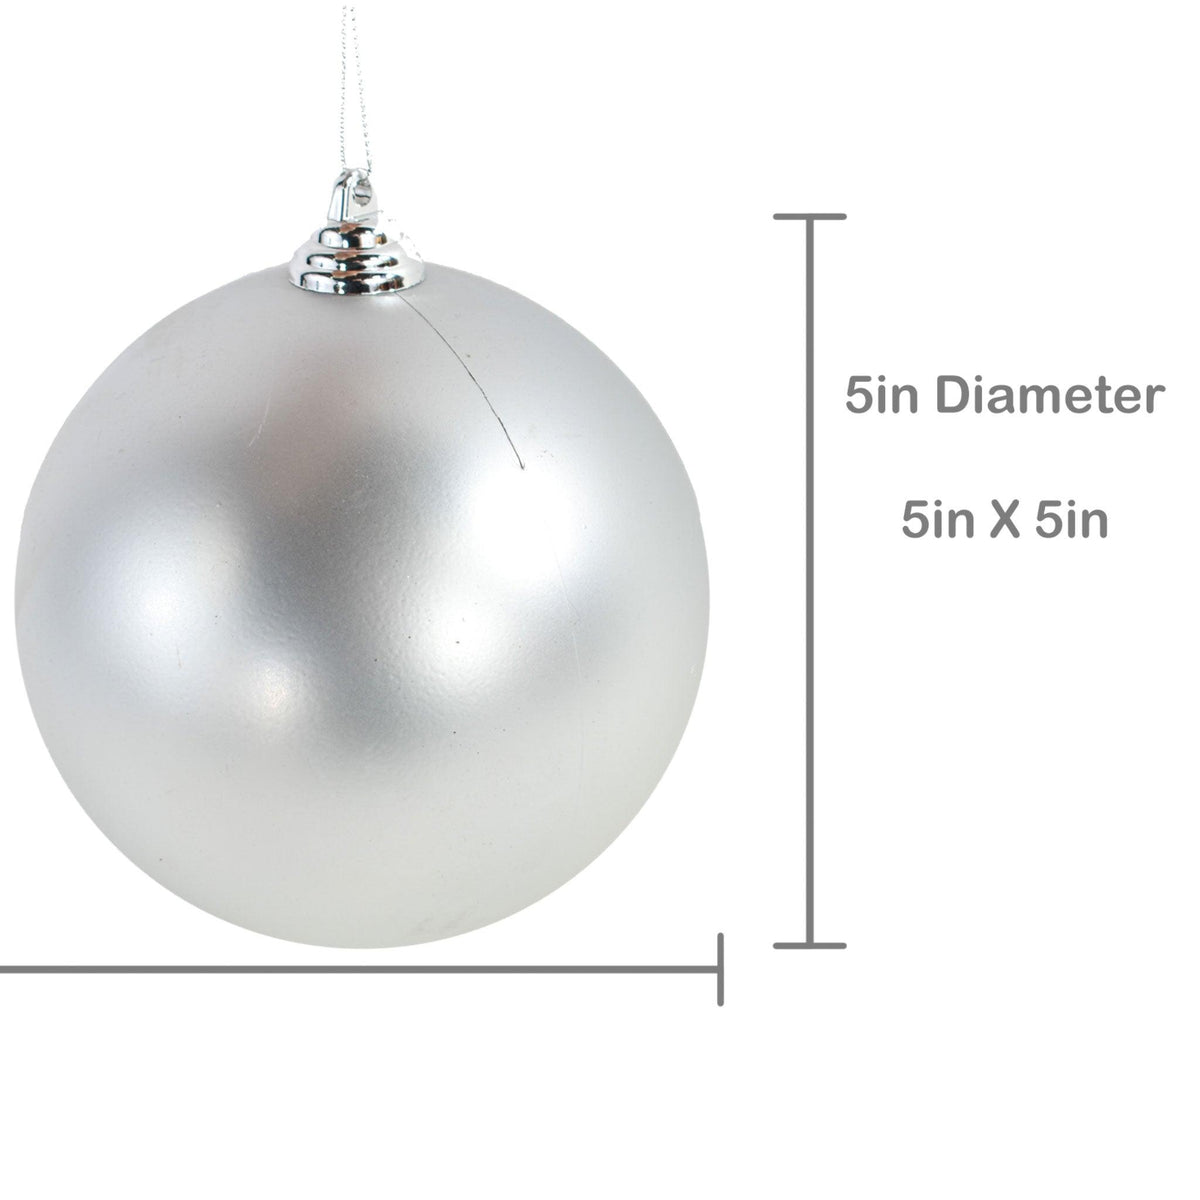 Lee Display offers brand new Shiny Matte Silver Plastic Ball Ornaments at wholesale prices for affordable Christmas Tree Hanging and Holiday Decorating on sale at leedisplay.com